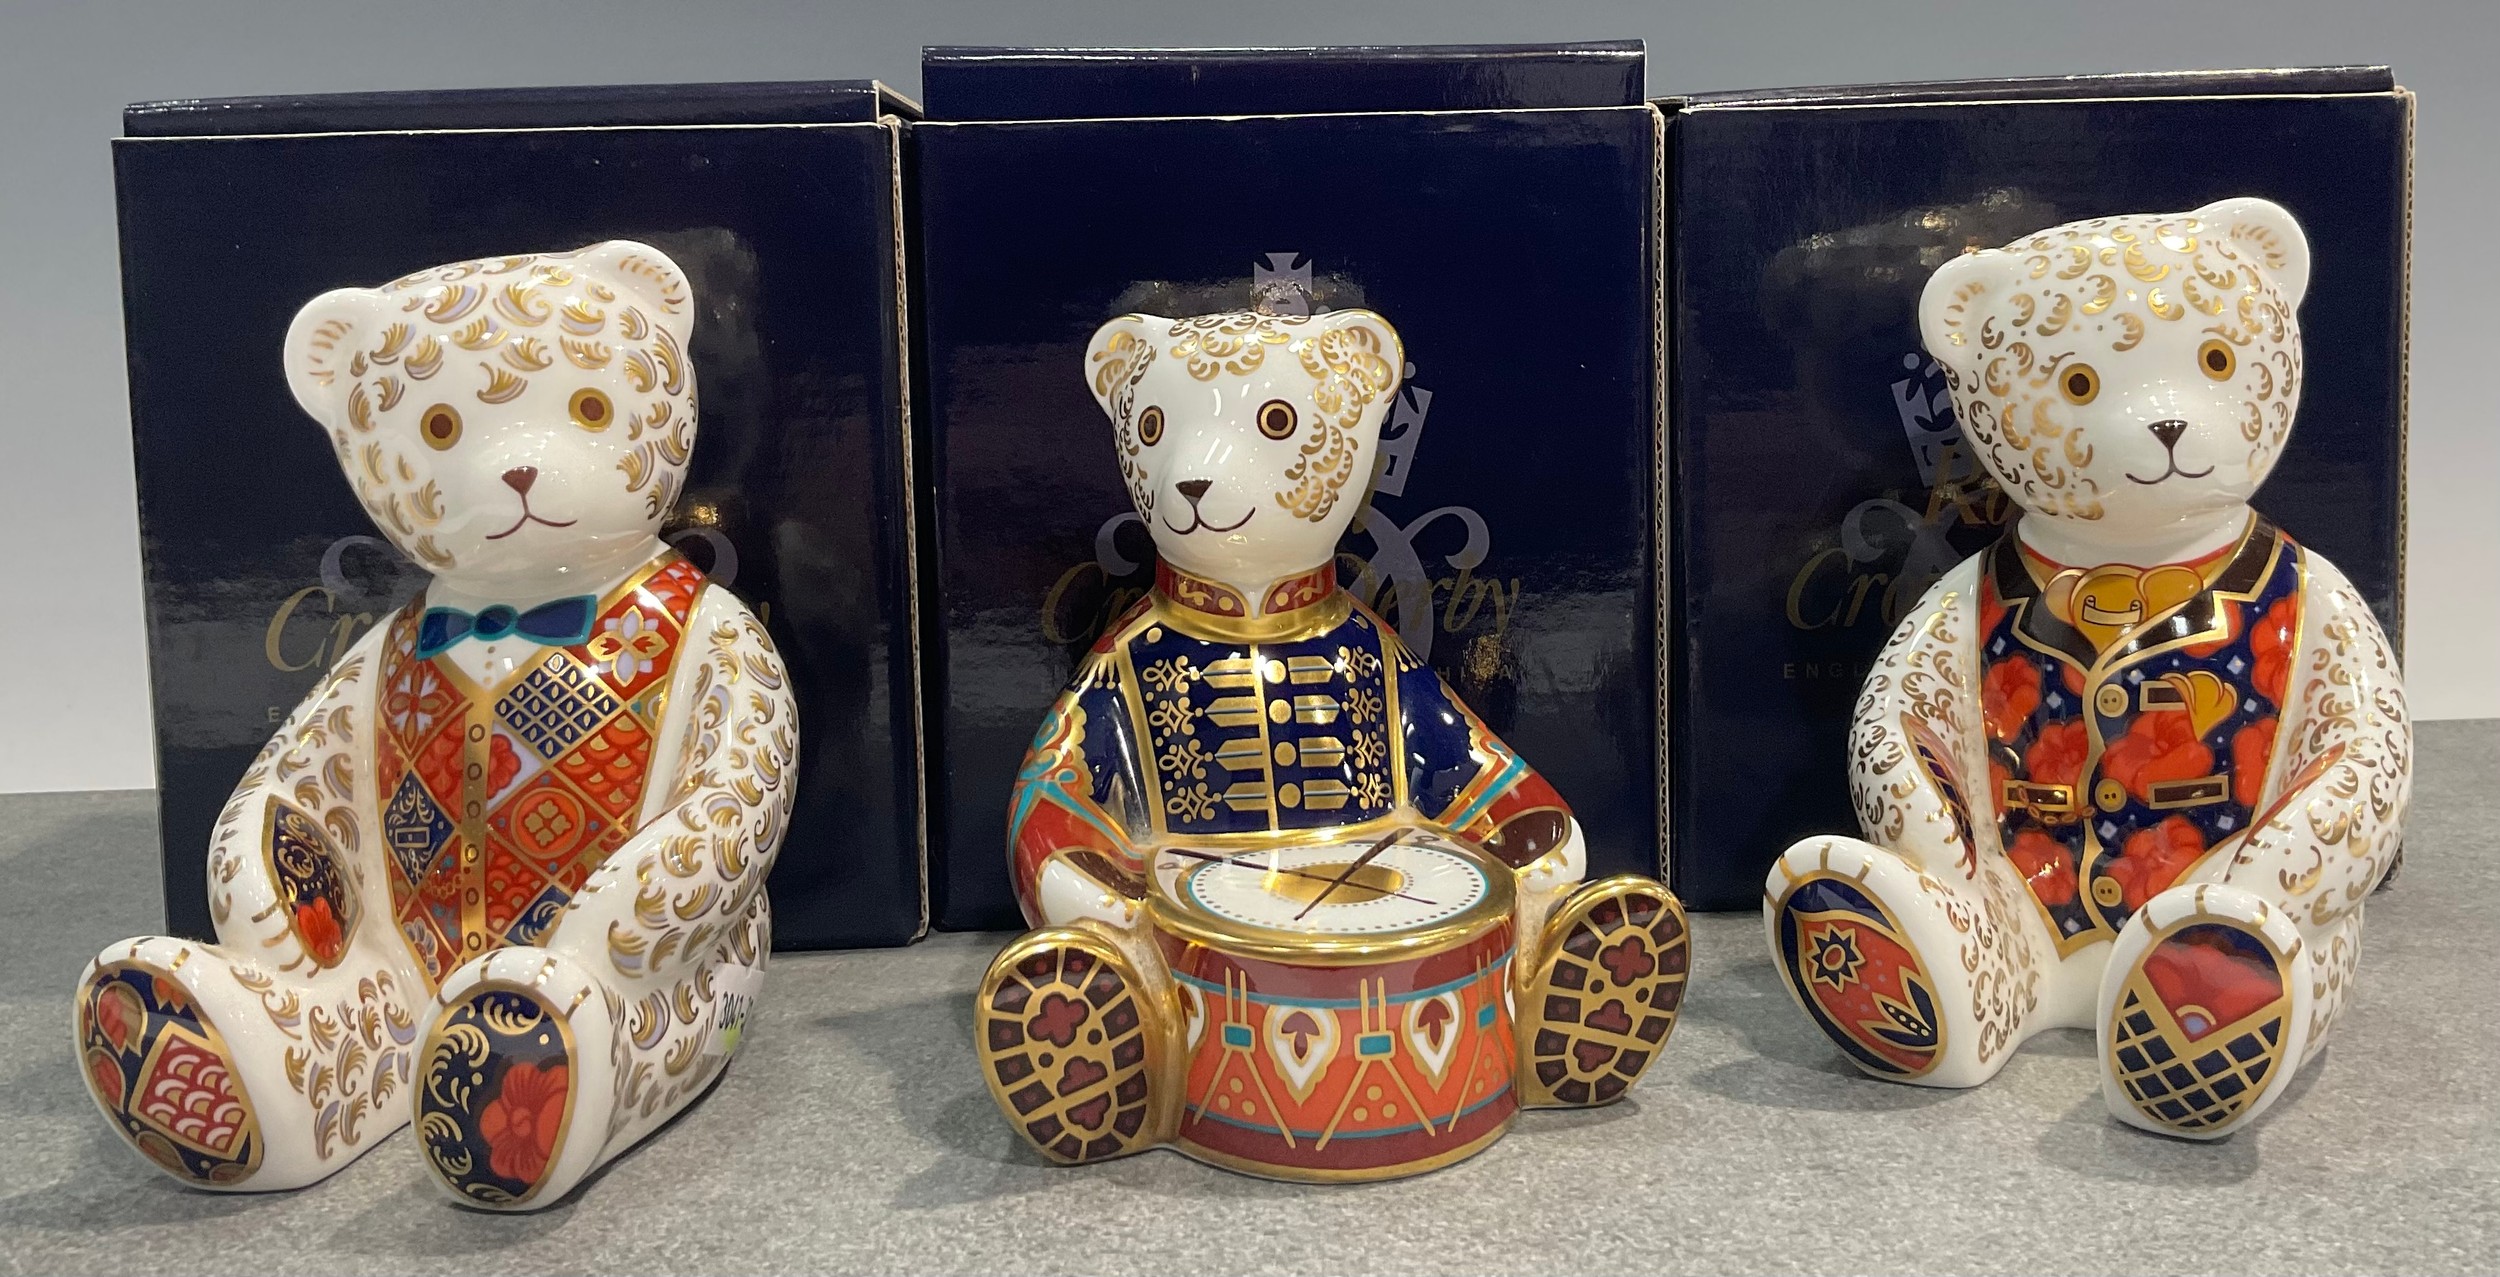 A Royal Crown Derby Teddy Bear paperweights, Debonair Bear, an exclusive for the Royal Crown Derby